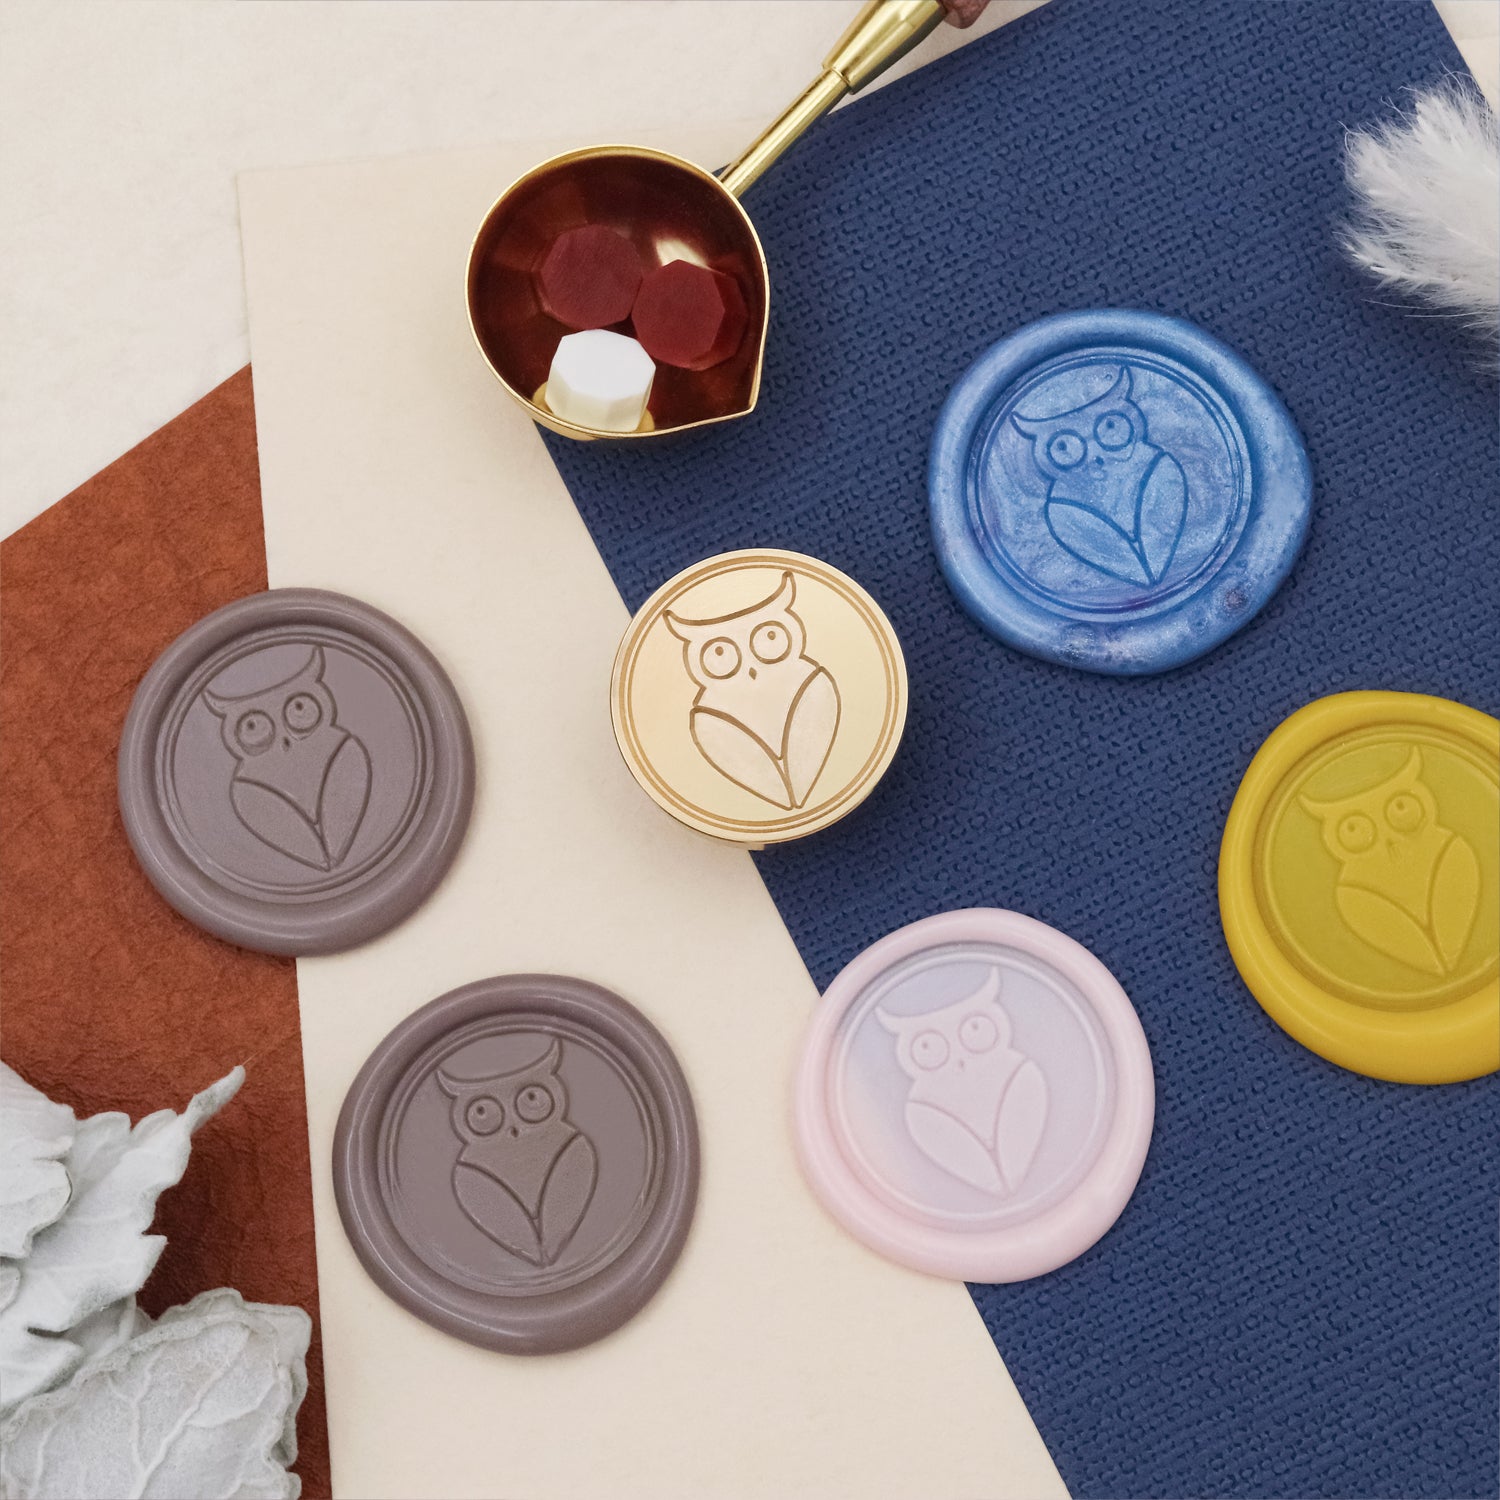 [In Stock] Harry Potter Wax Seal Stamp Heads